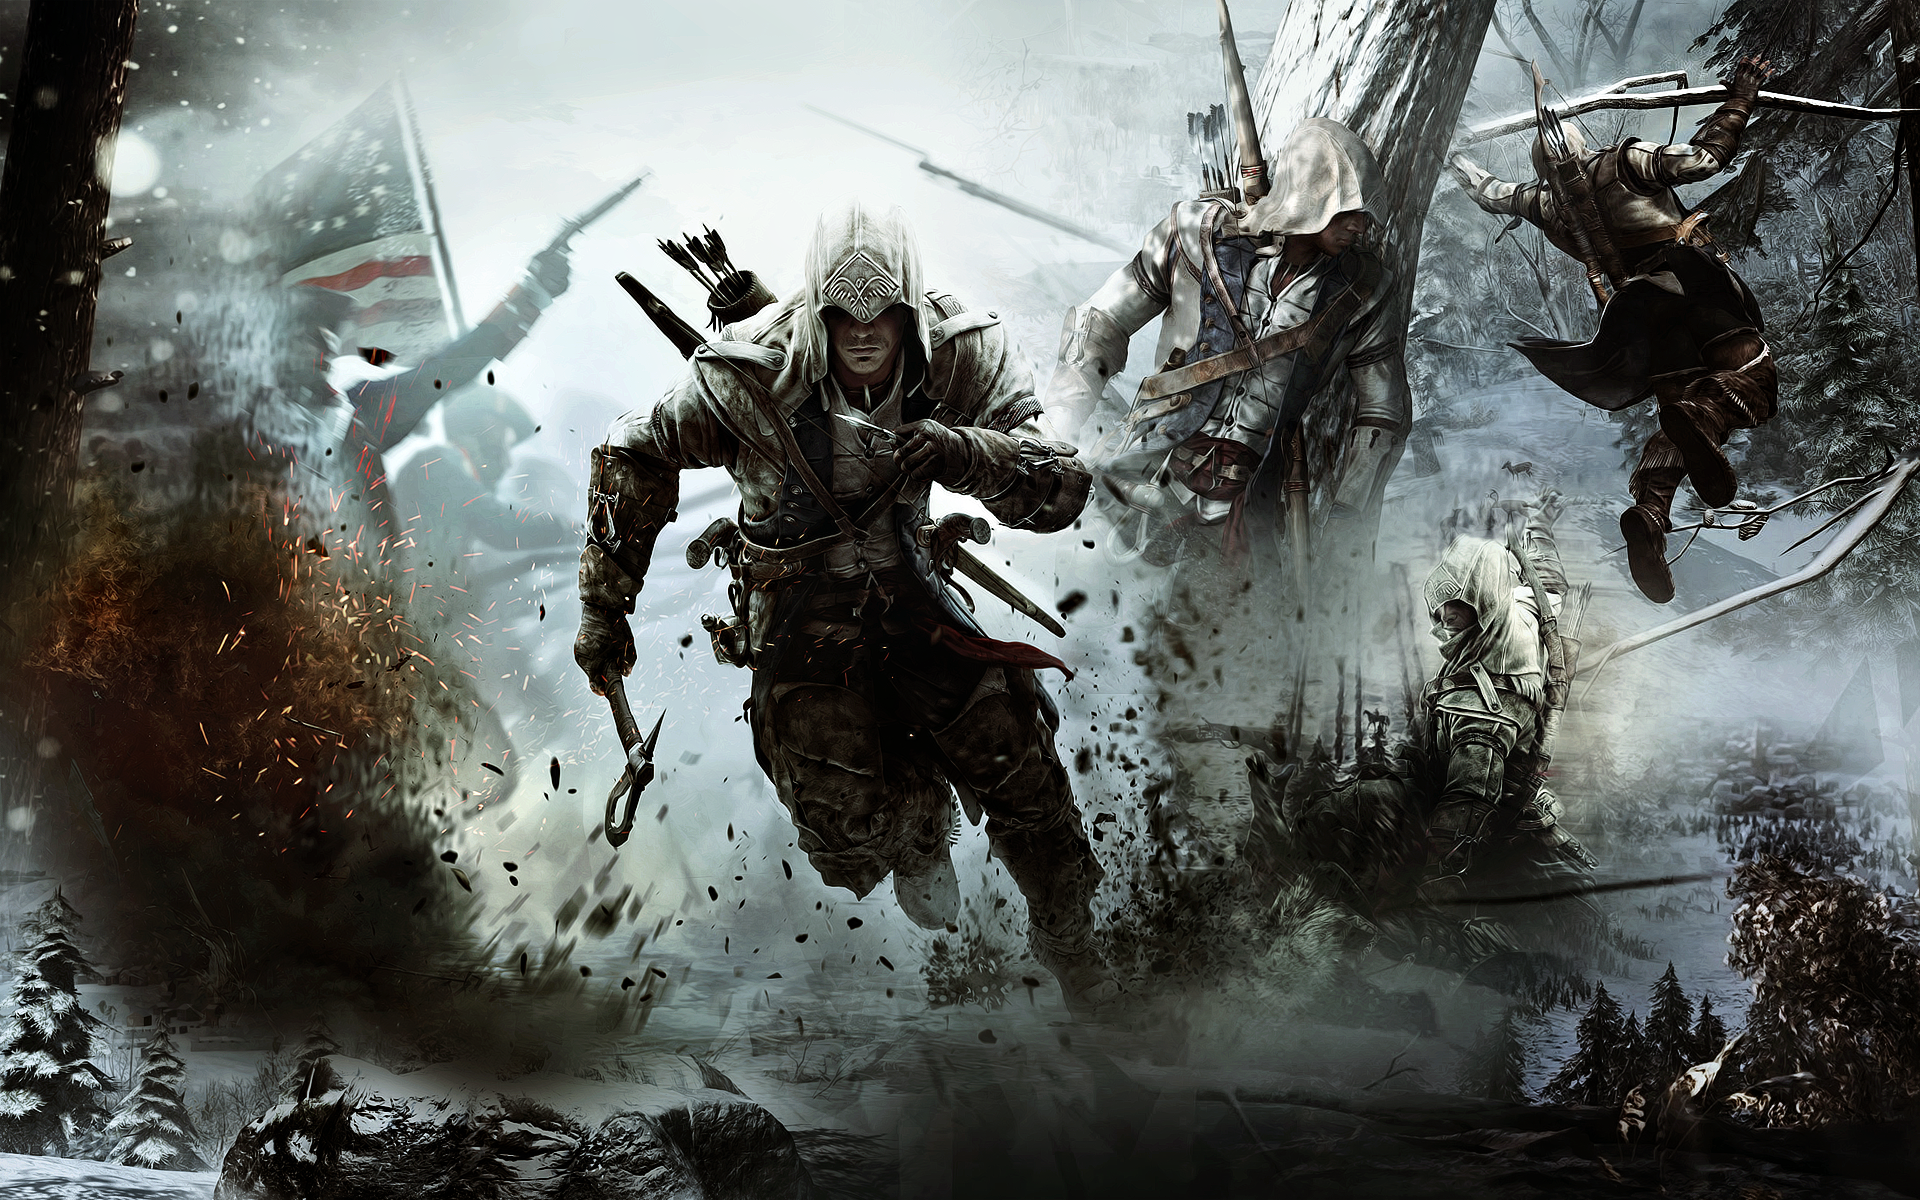  Assassins Creed III or even videos related to Assassins Creed III 1920x1200